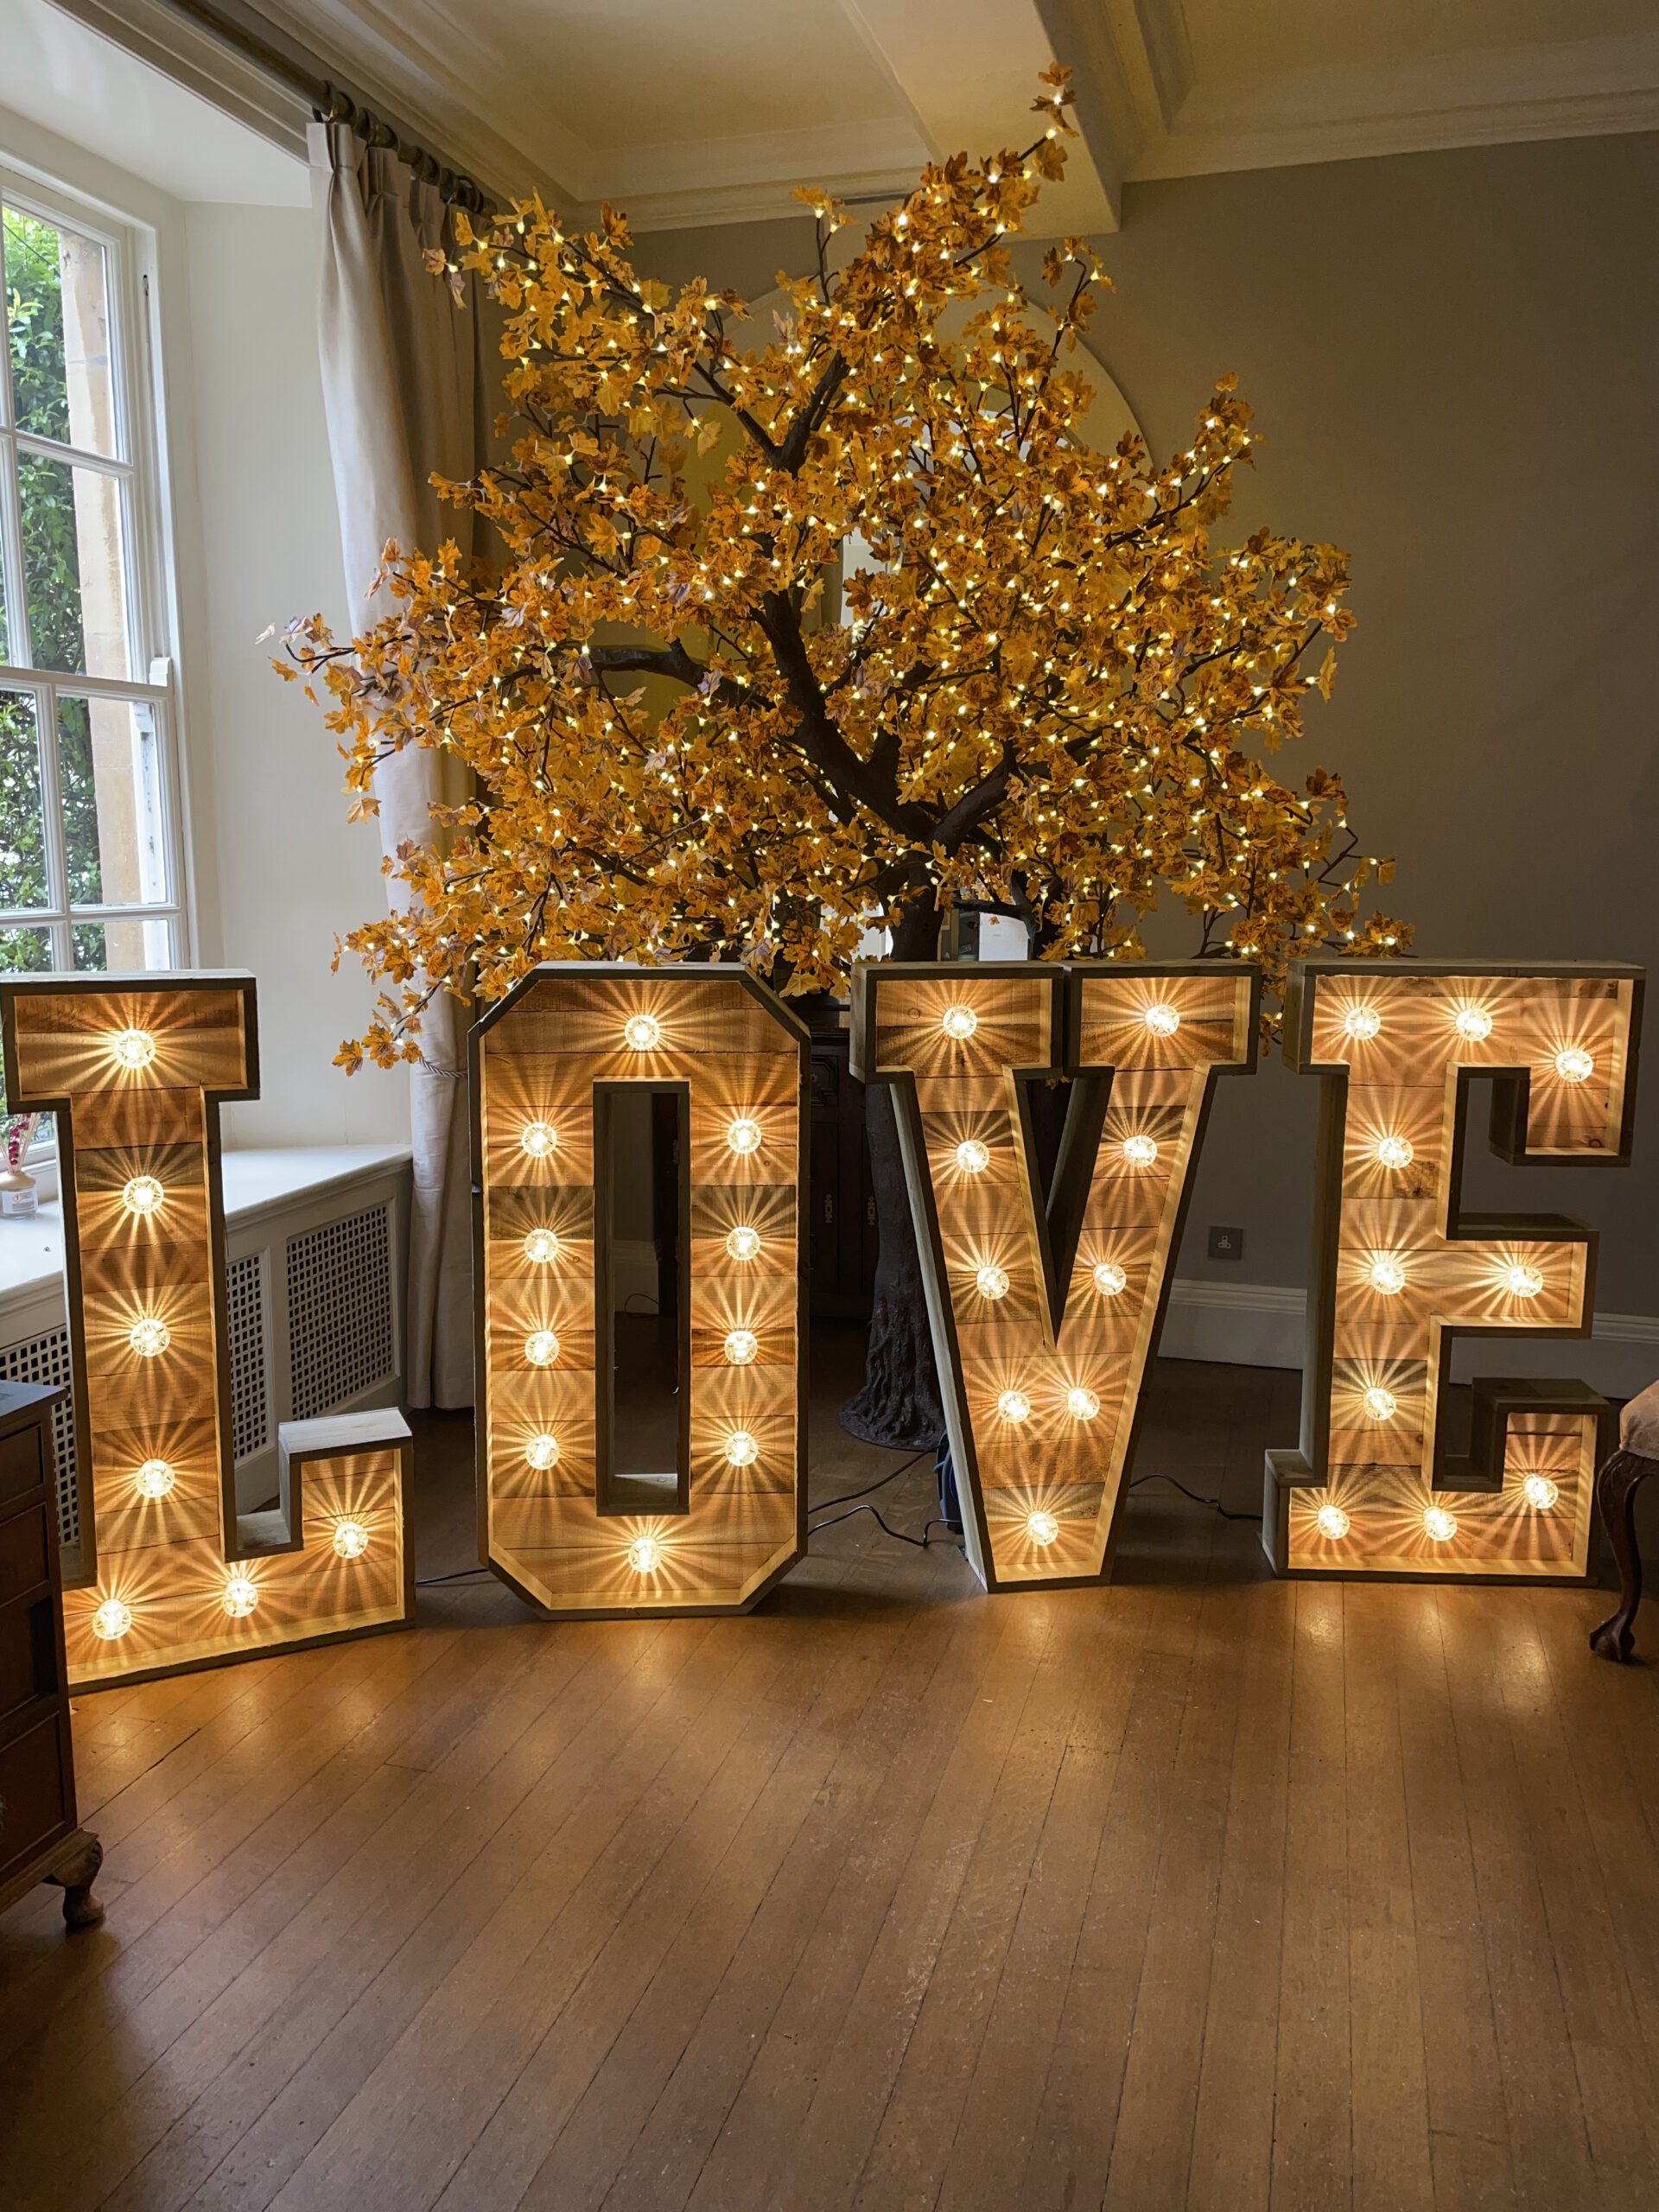 Giant love letters at Holbrook Manor